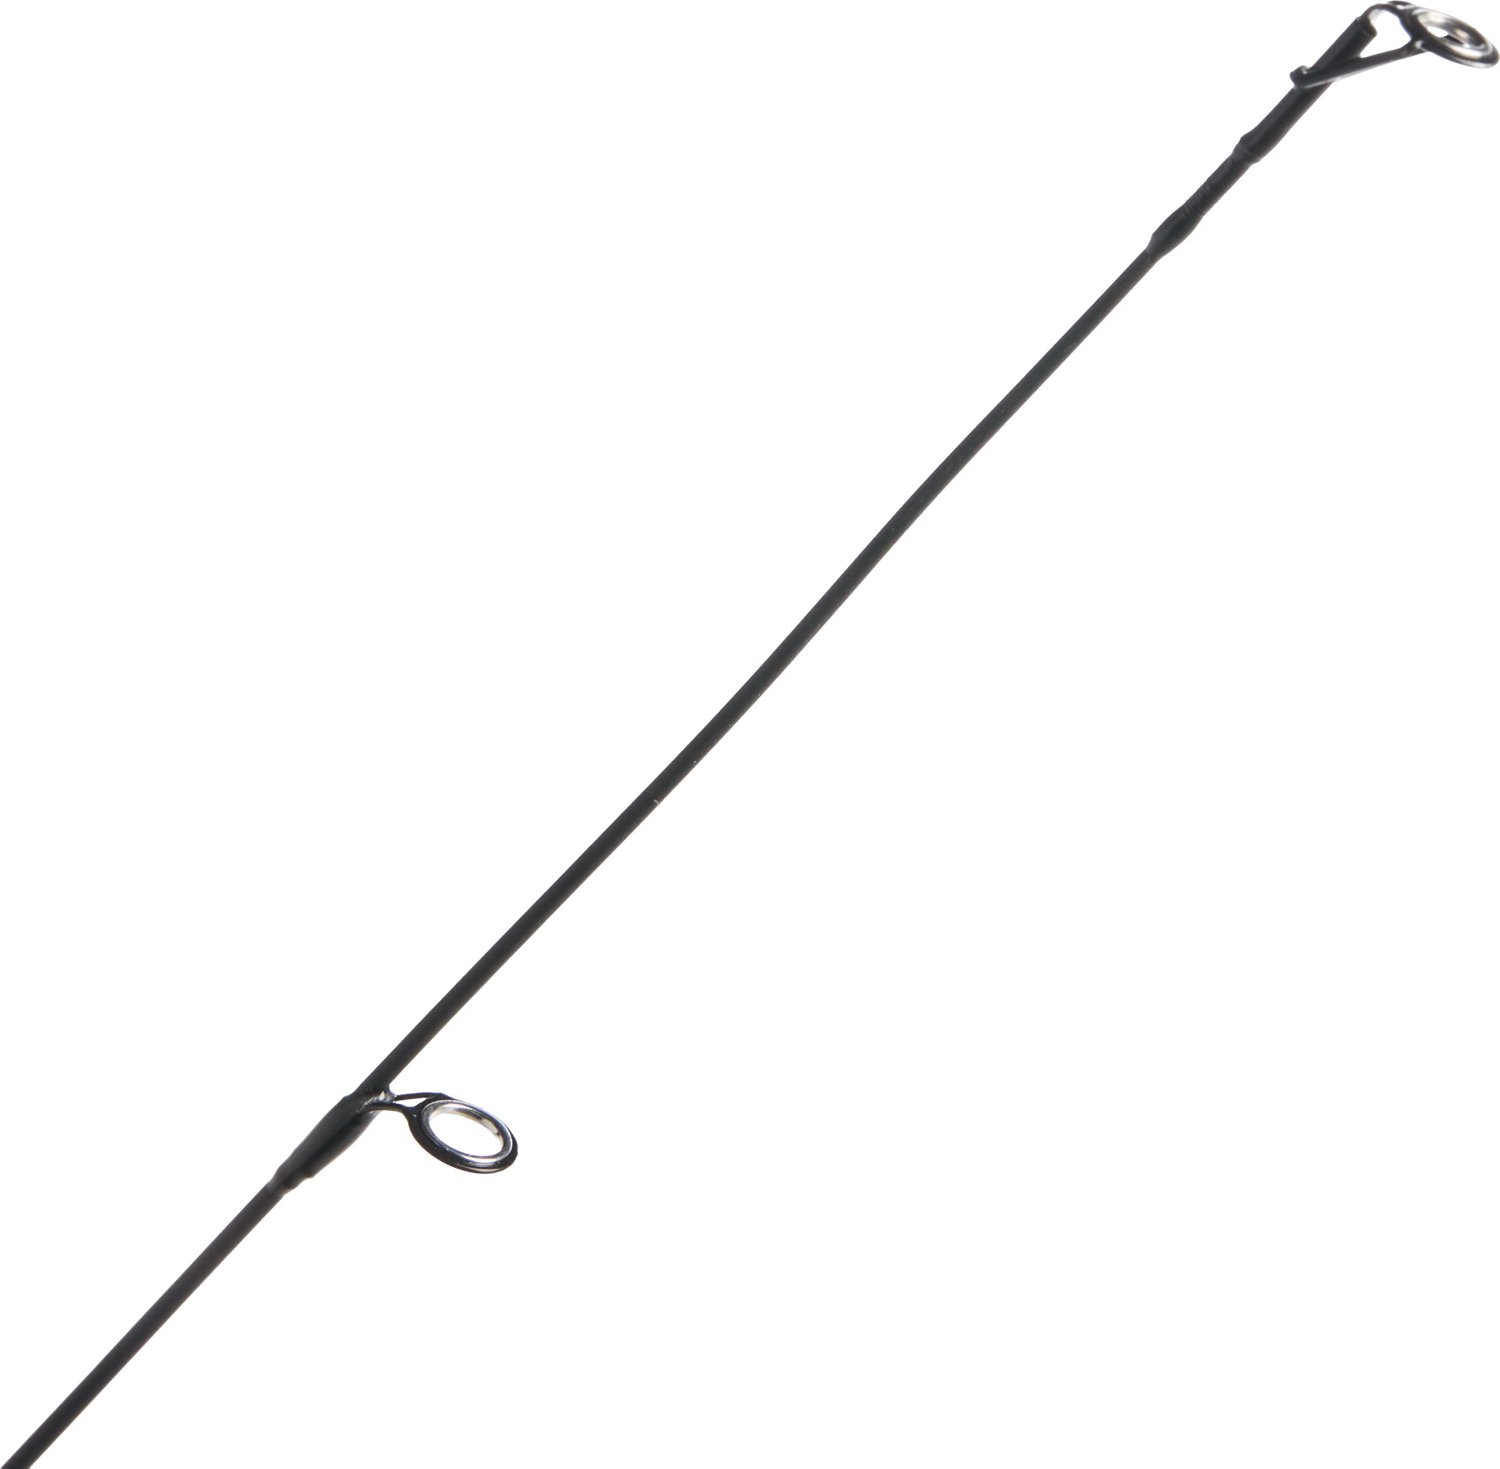 H2O XPRESS Tiny Ultralight Spinning Rod and Reel Kit